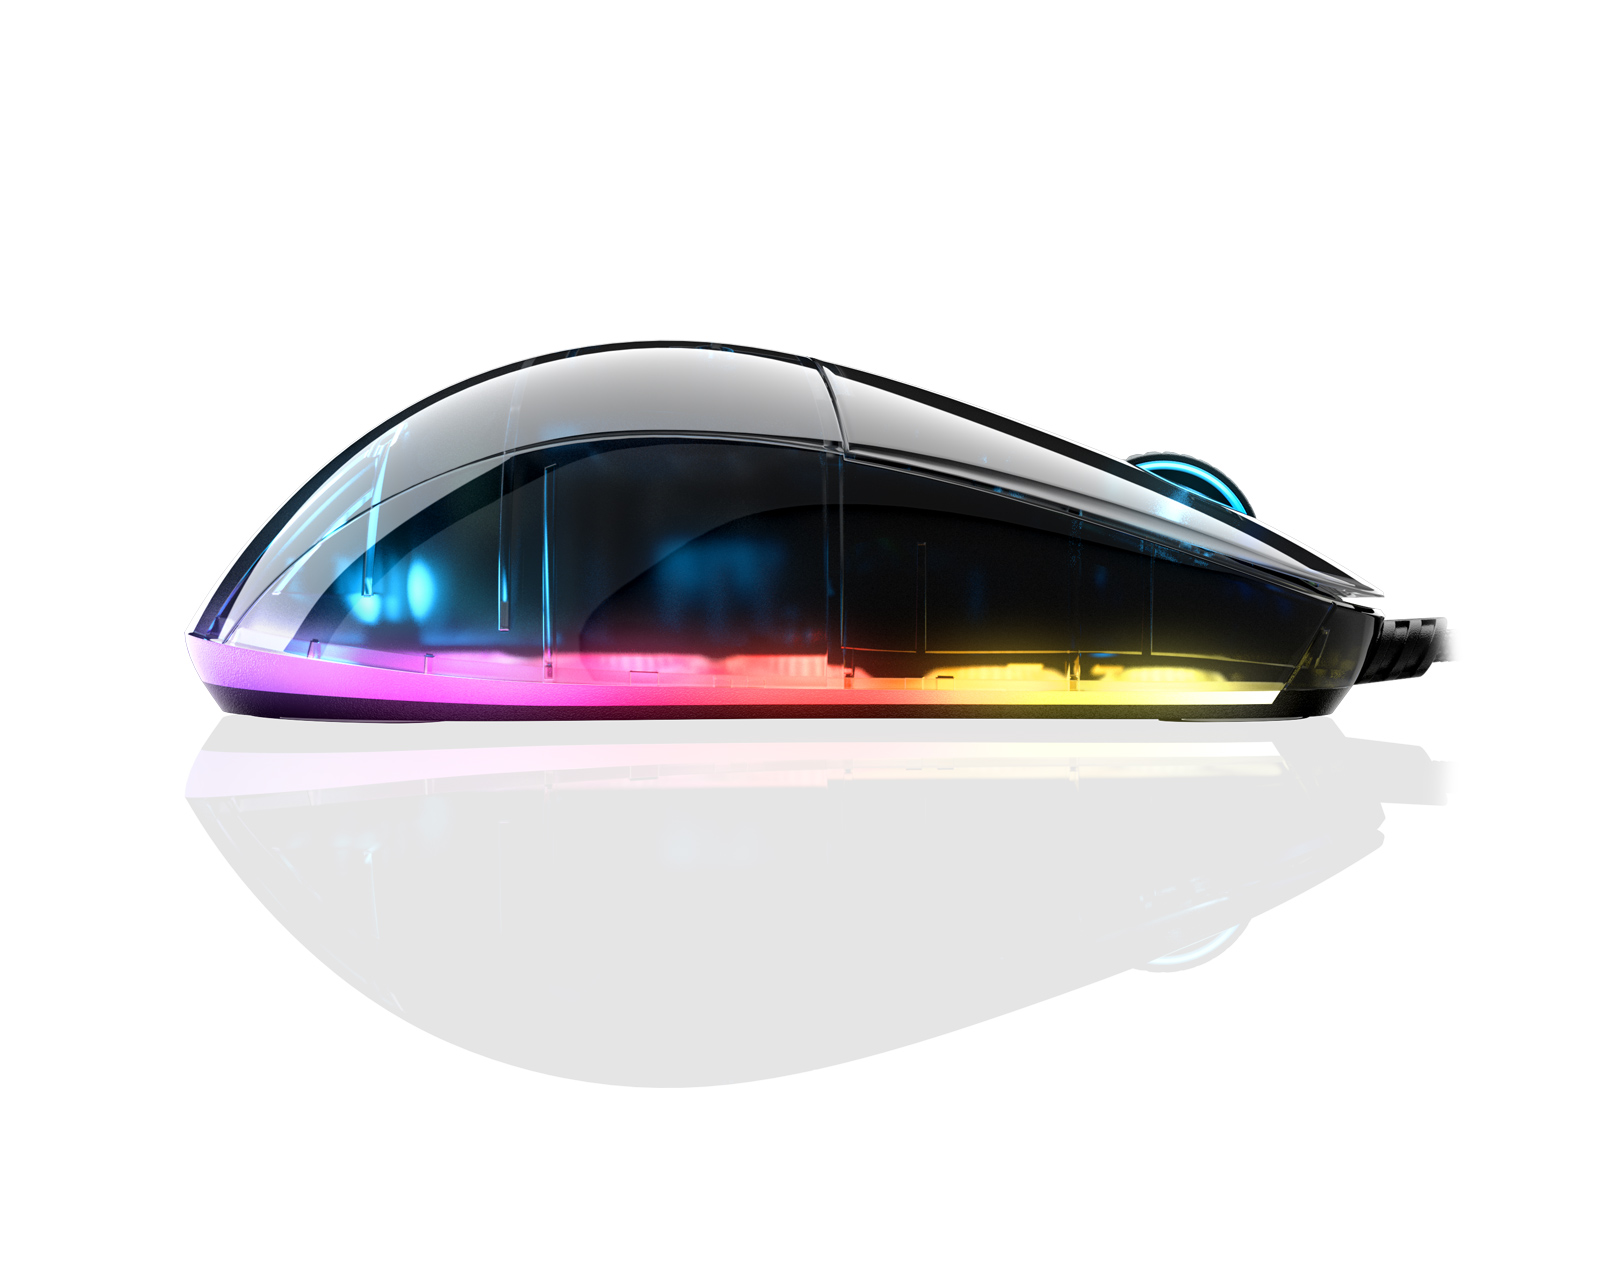  ENDGAME GEAR XM1 RGB Gaming Mouse, Programmable Mouse with 6  Buttons and 16,000 DPI, Black : Video Games